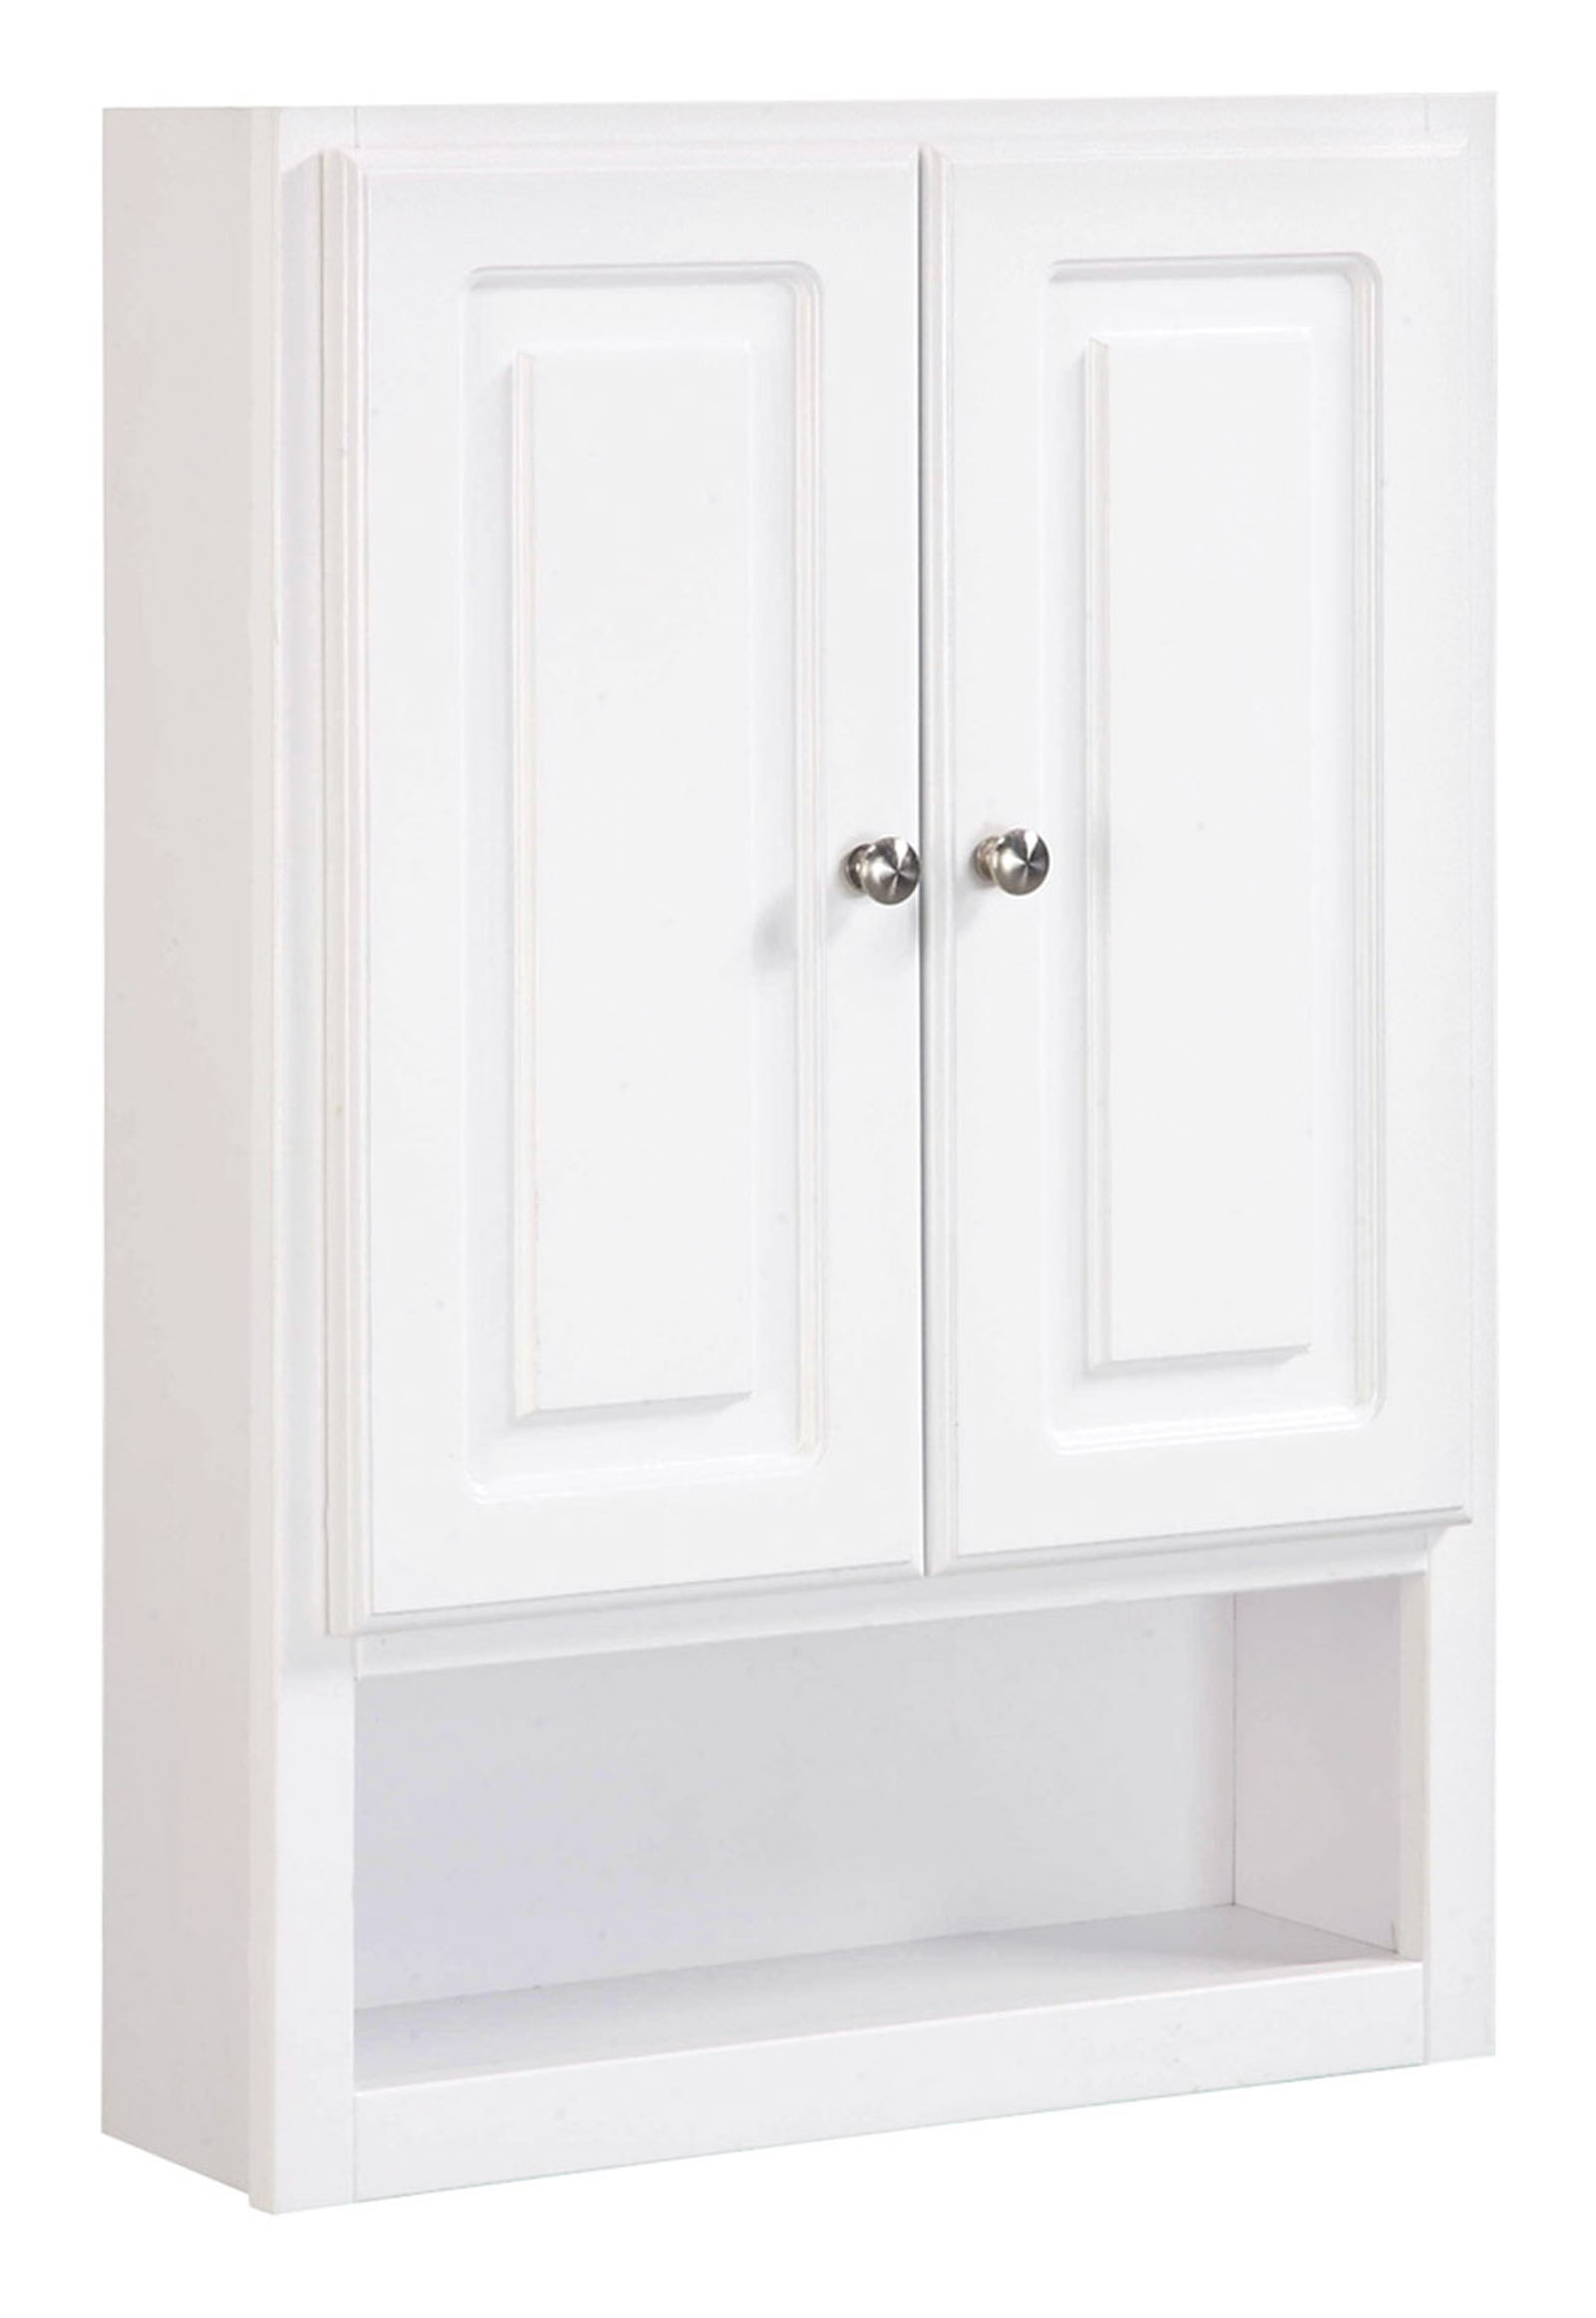 Design House 531319 30-Inch by 21-Inch Concord Ready-To-Assemble 2 Door with Shelf Wall Bathroom Cabinet, White